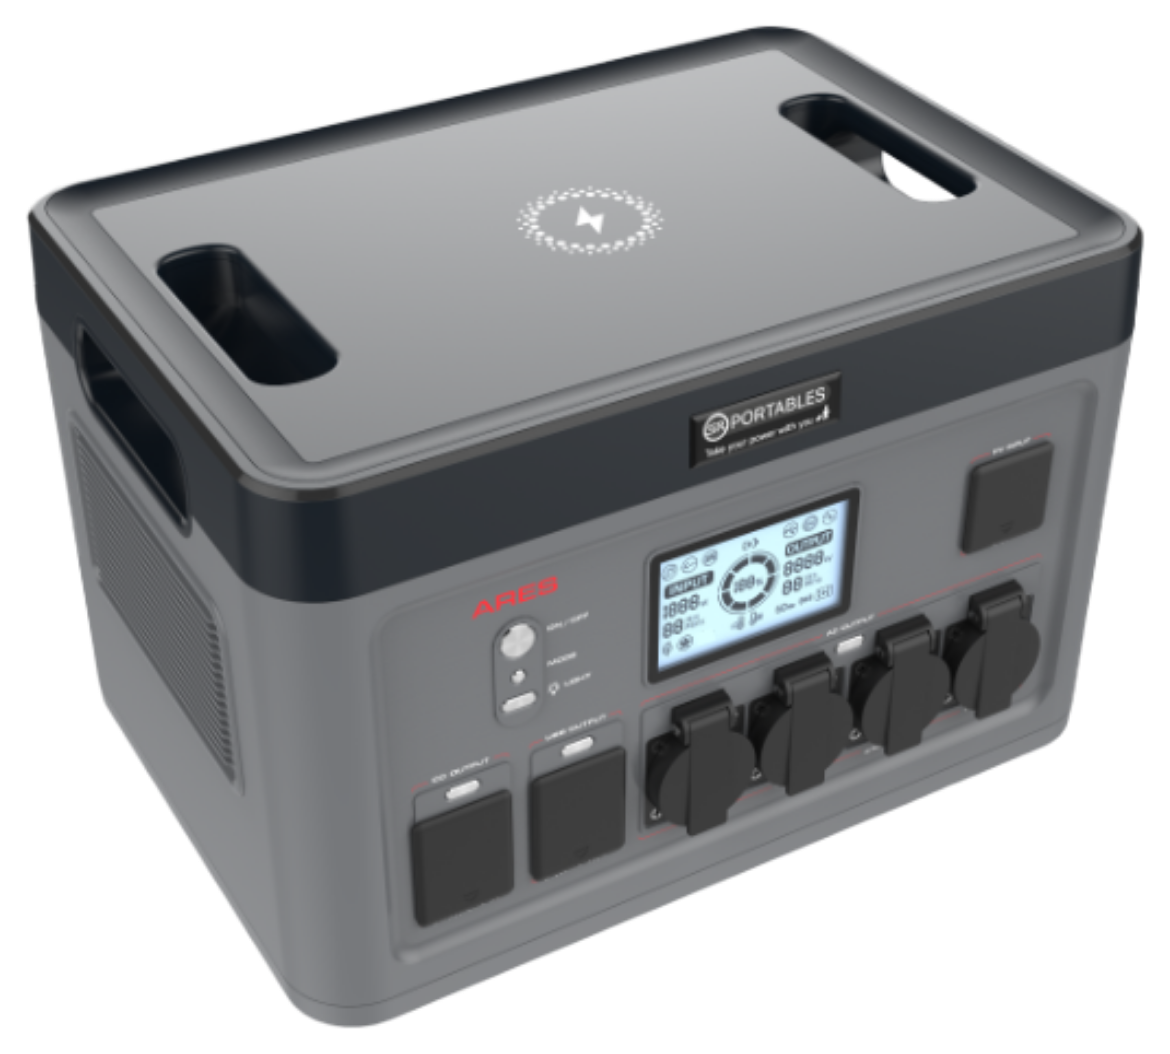 Picture of ARES 2060WH PORTABLE LITHIUM SOLAR GENERATOR (LITHIUM POWER BANK) - SR PORTABLES (AUSTRALIAN MADE)